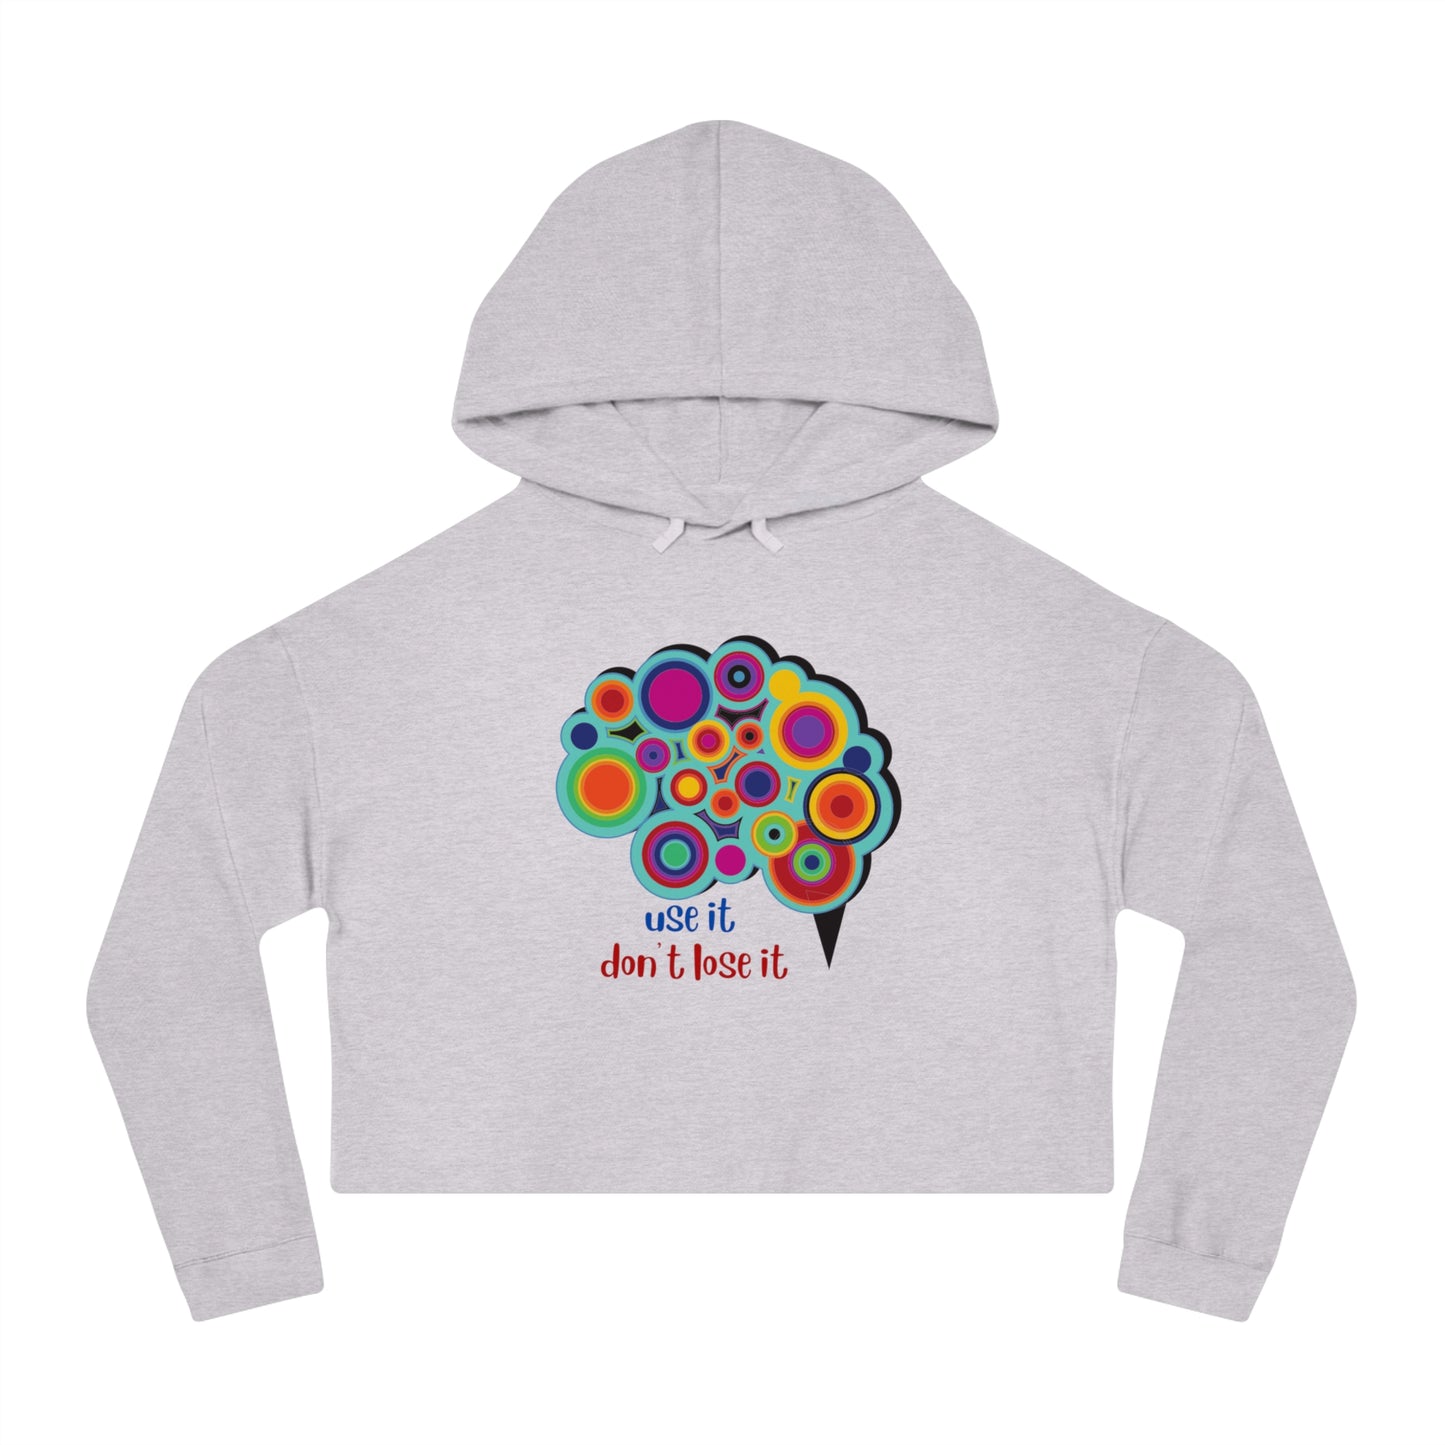 Very colorful and mesmerizing brain with “use it don’t lose it” message below it on this stylish Women’s Cropped Hooded Sweatshirt for your enjoyment.